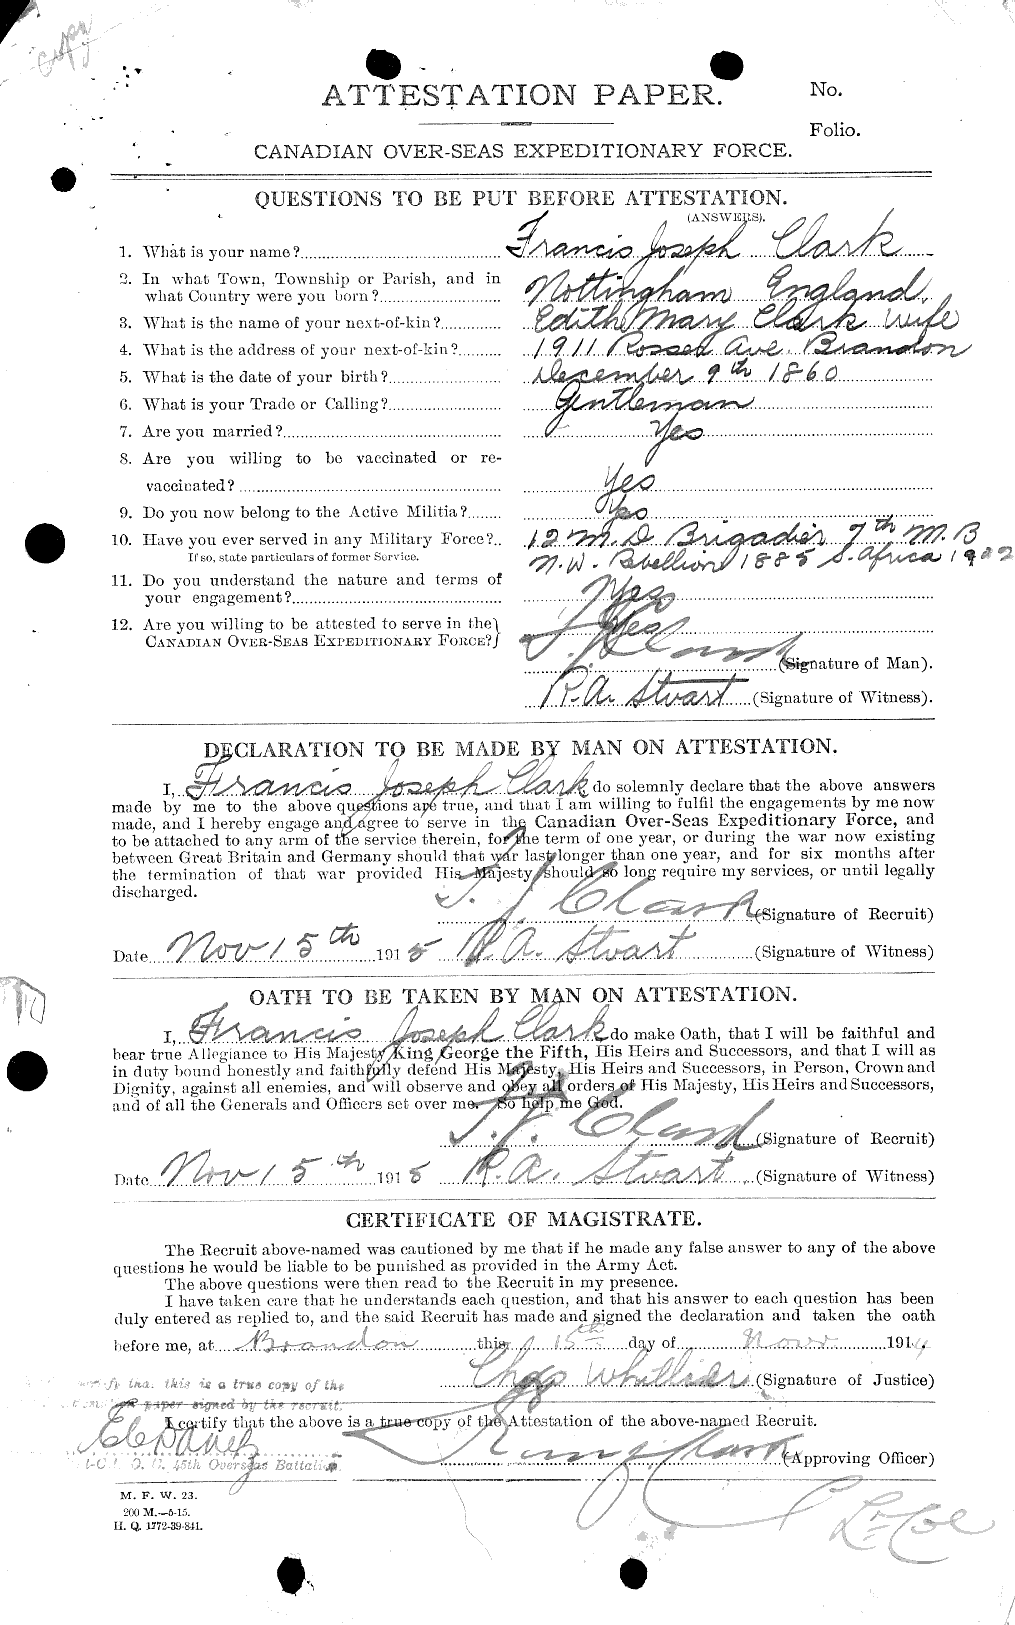 Personnel Records of the First World War - CEF 020906a